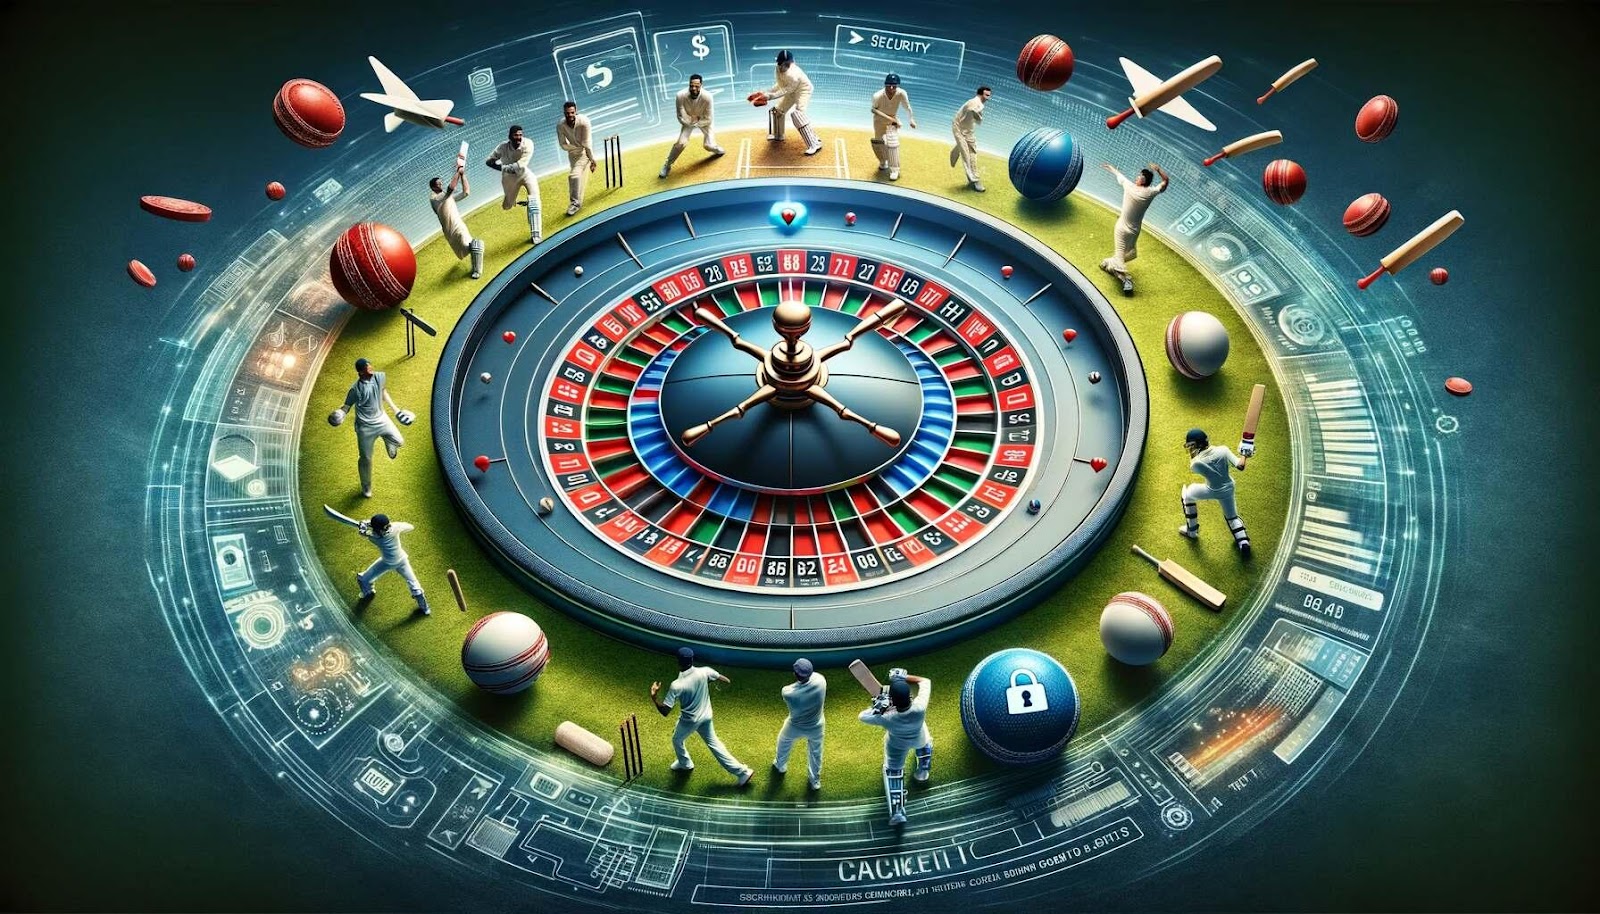 Fair play in online and betting casinos, with cricket players and a roulette table.